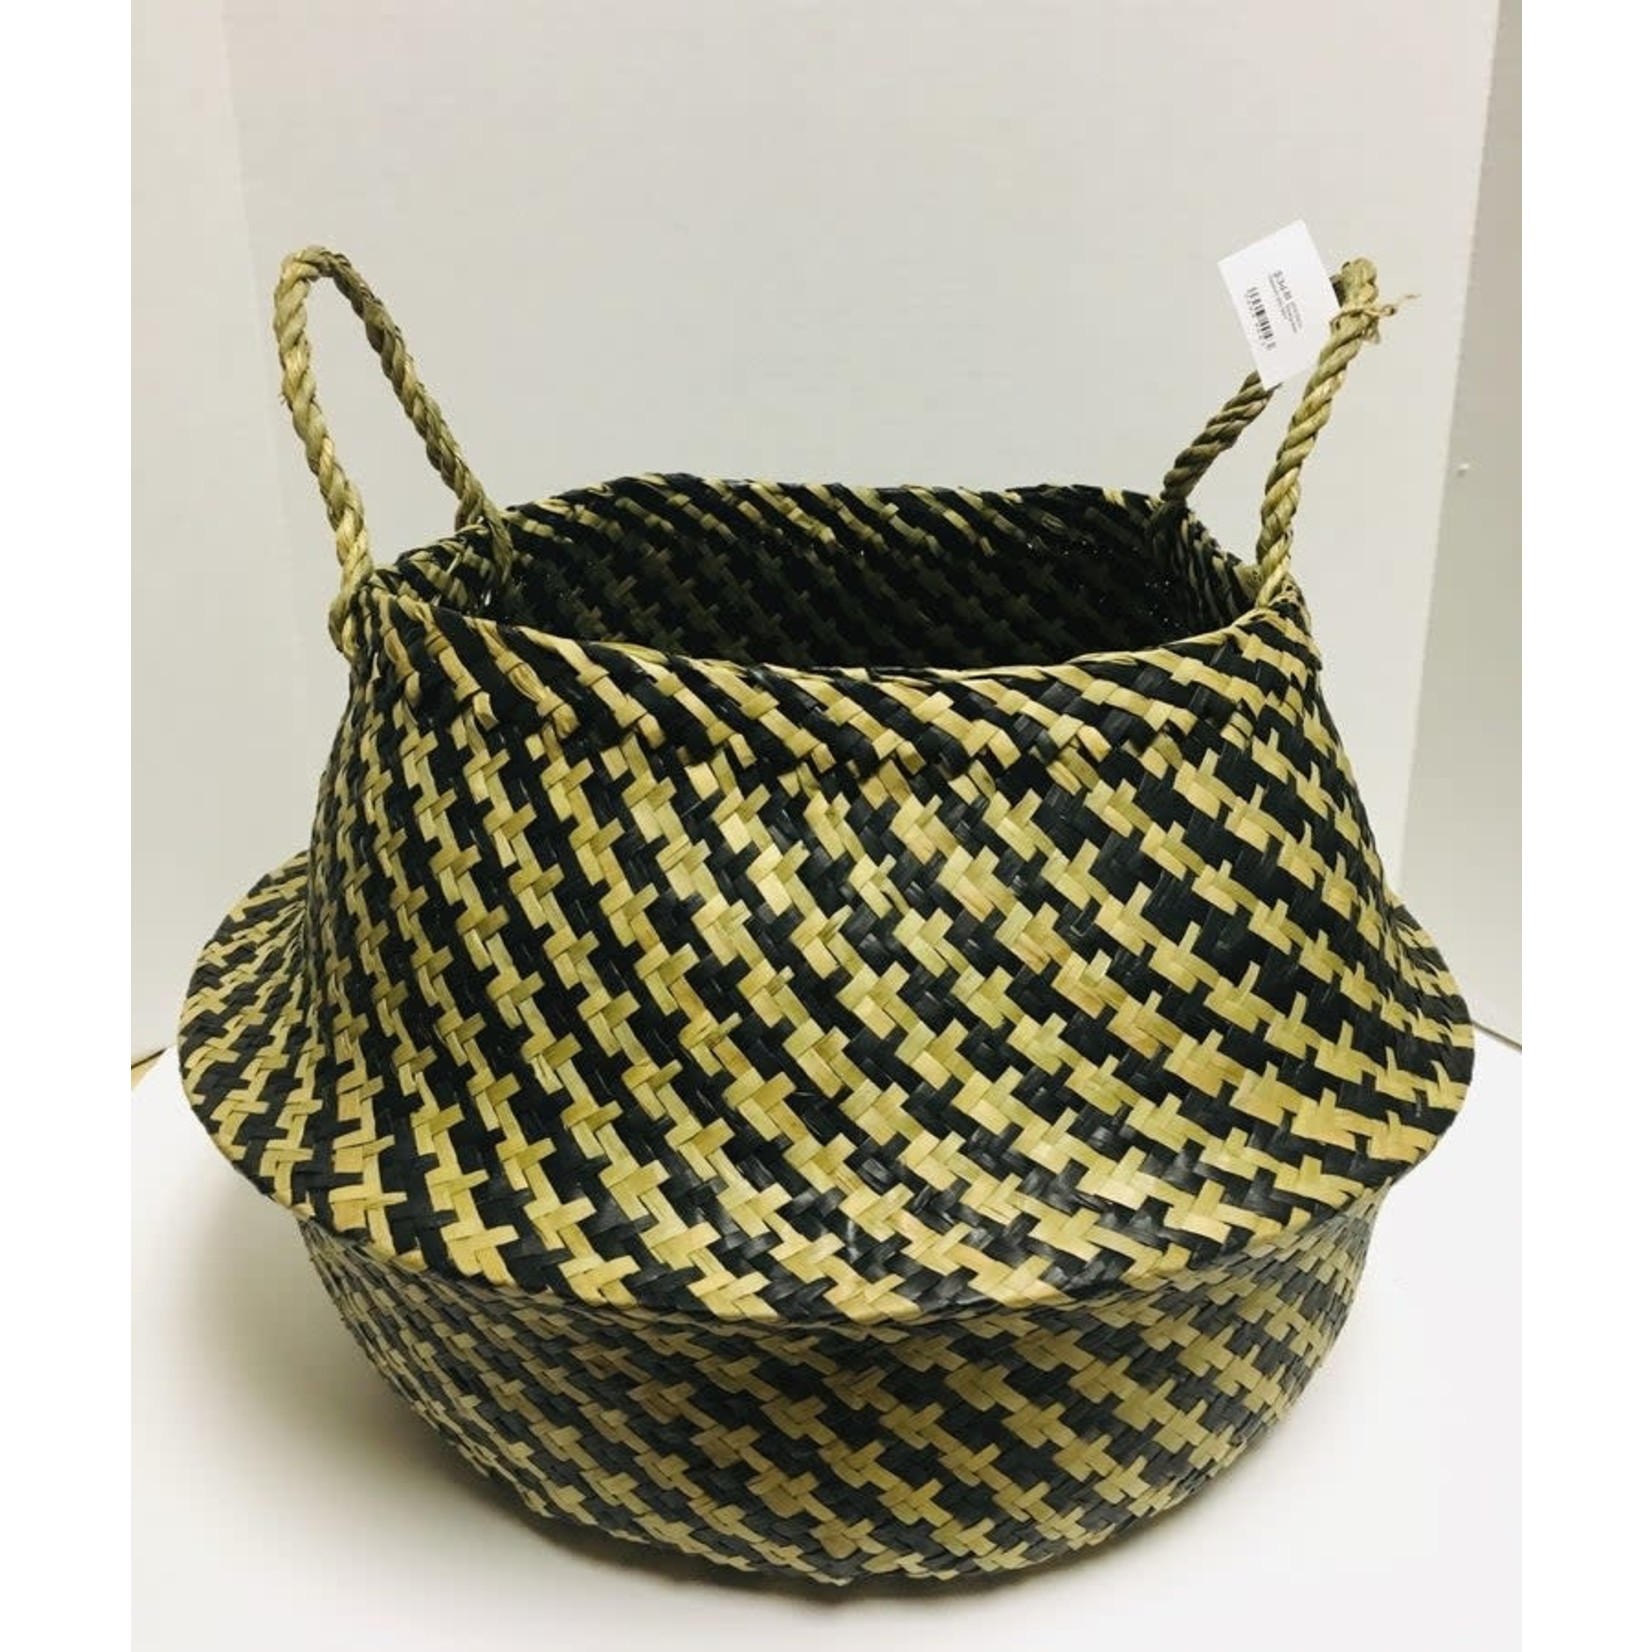 Striped Seagrass Basket with Handles, Natural & Black